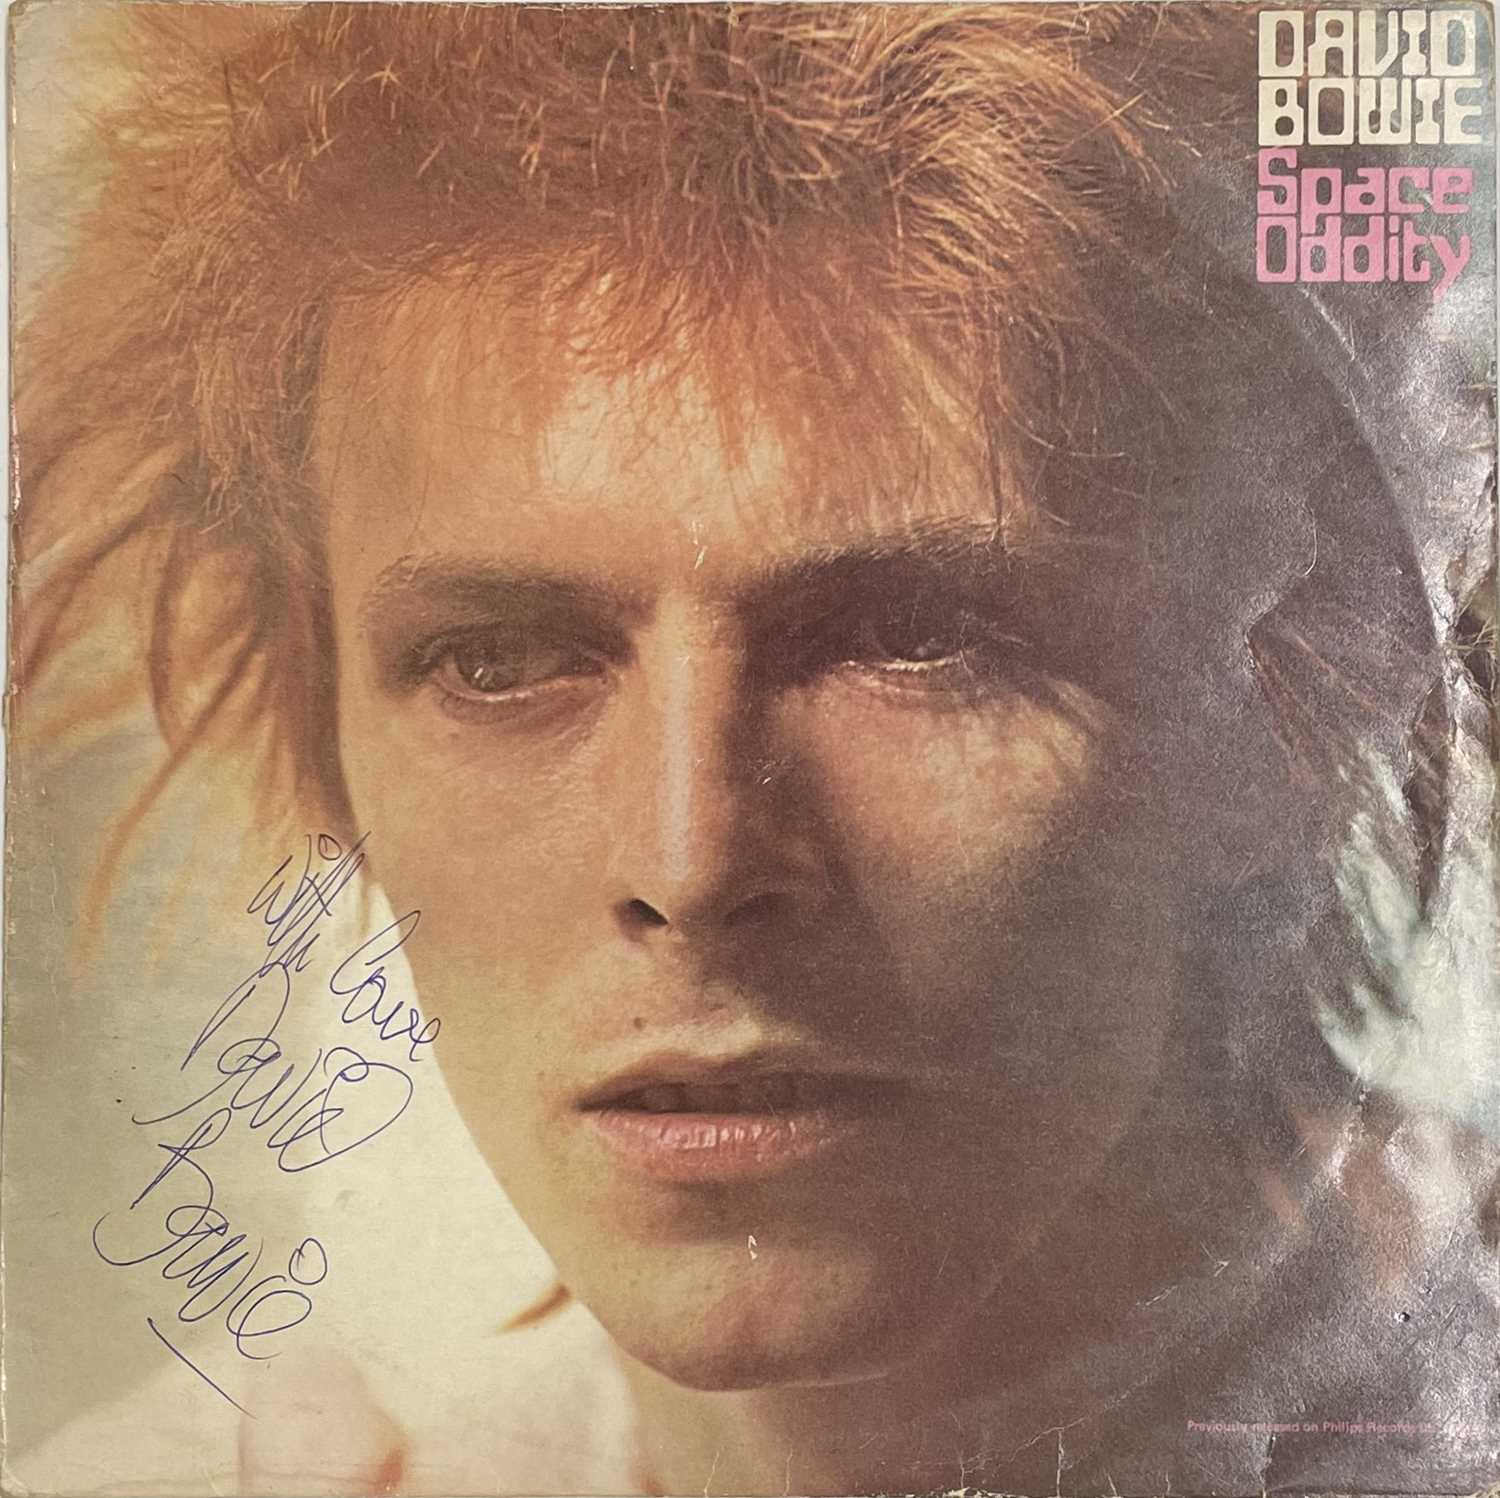 Lot 424 - DAVID BOWIE - SIGNED SPACE ODDITY LP.